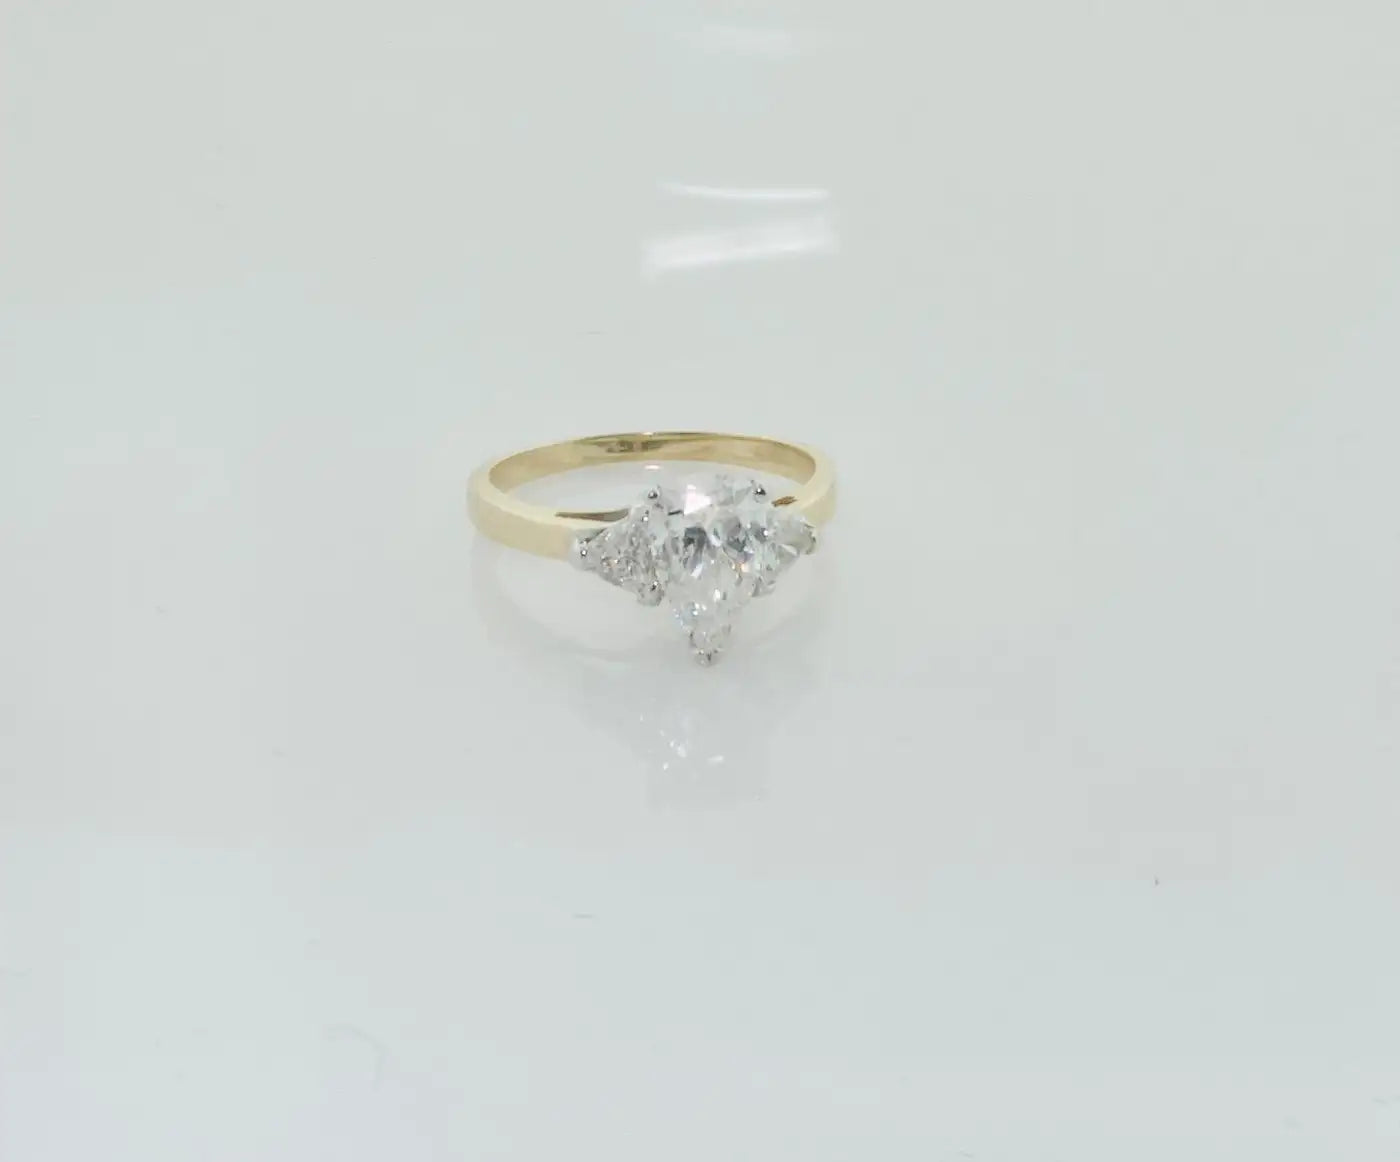 Pear Shape Diamond Engagement Ring 1.23 Carats GIA GVS2 in 18k Gold